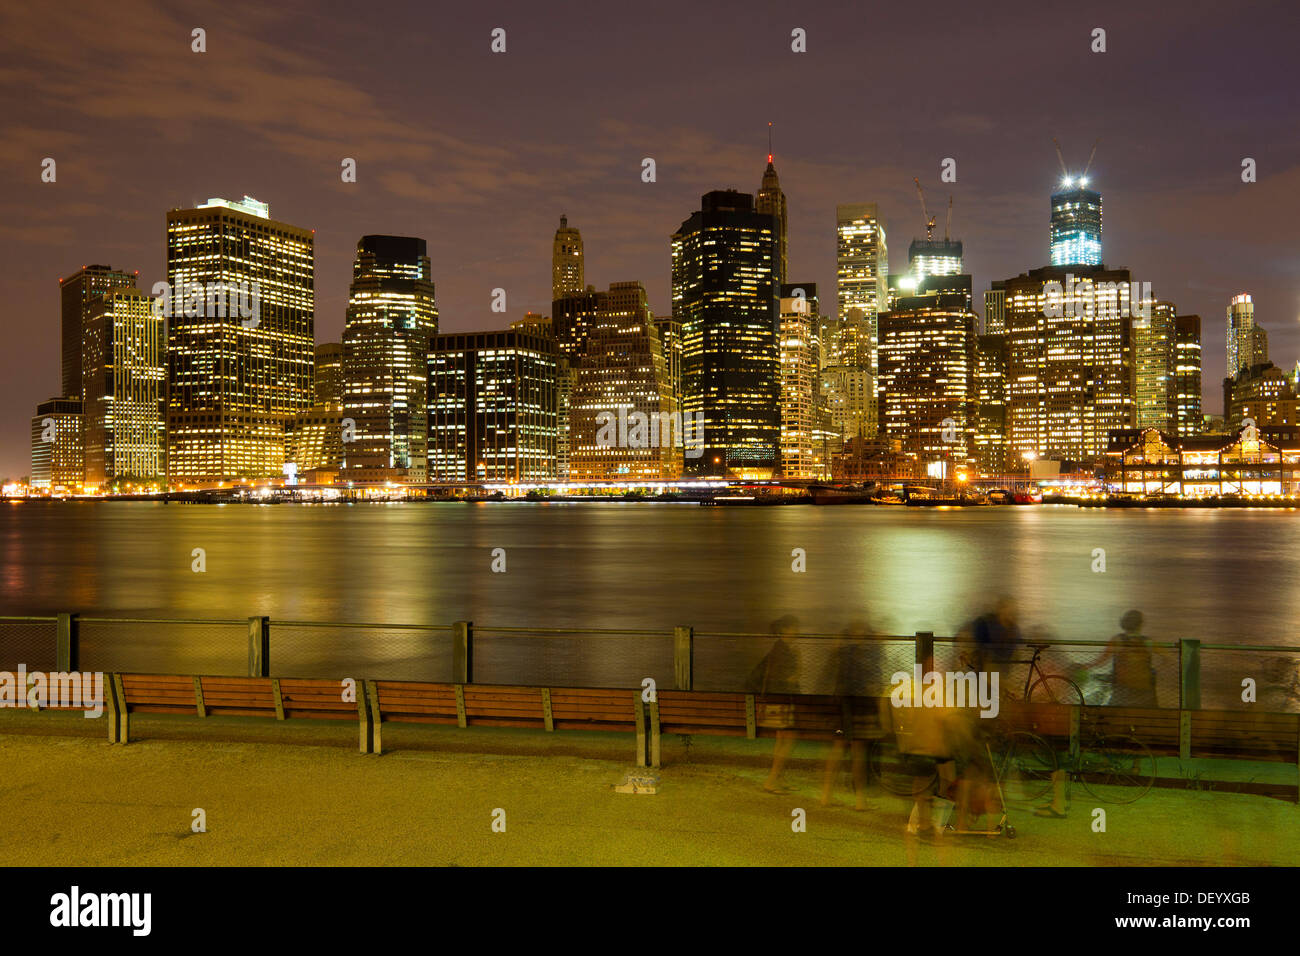 Brooklyn waterfront, view across the East River to the skyline of Manhattan, New York City, USA Stock Photo